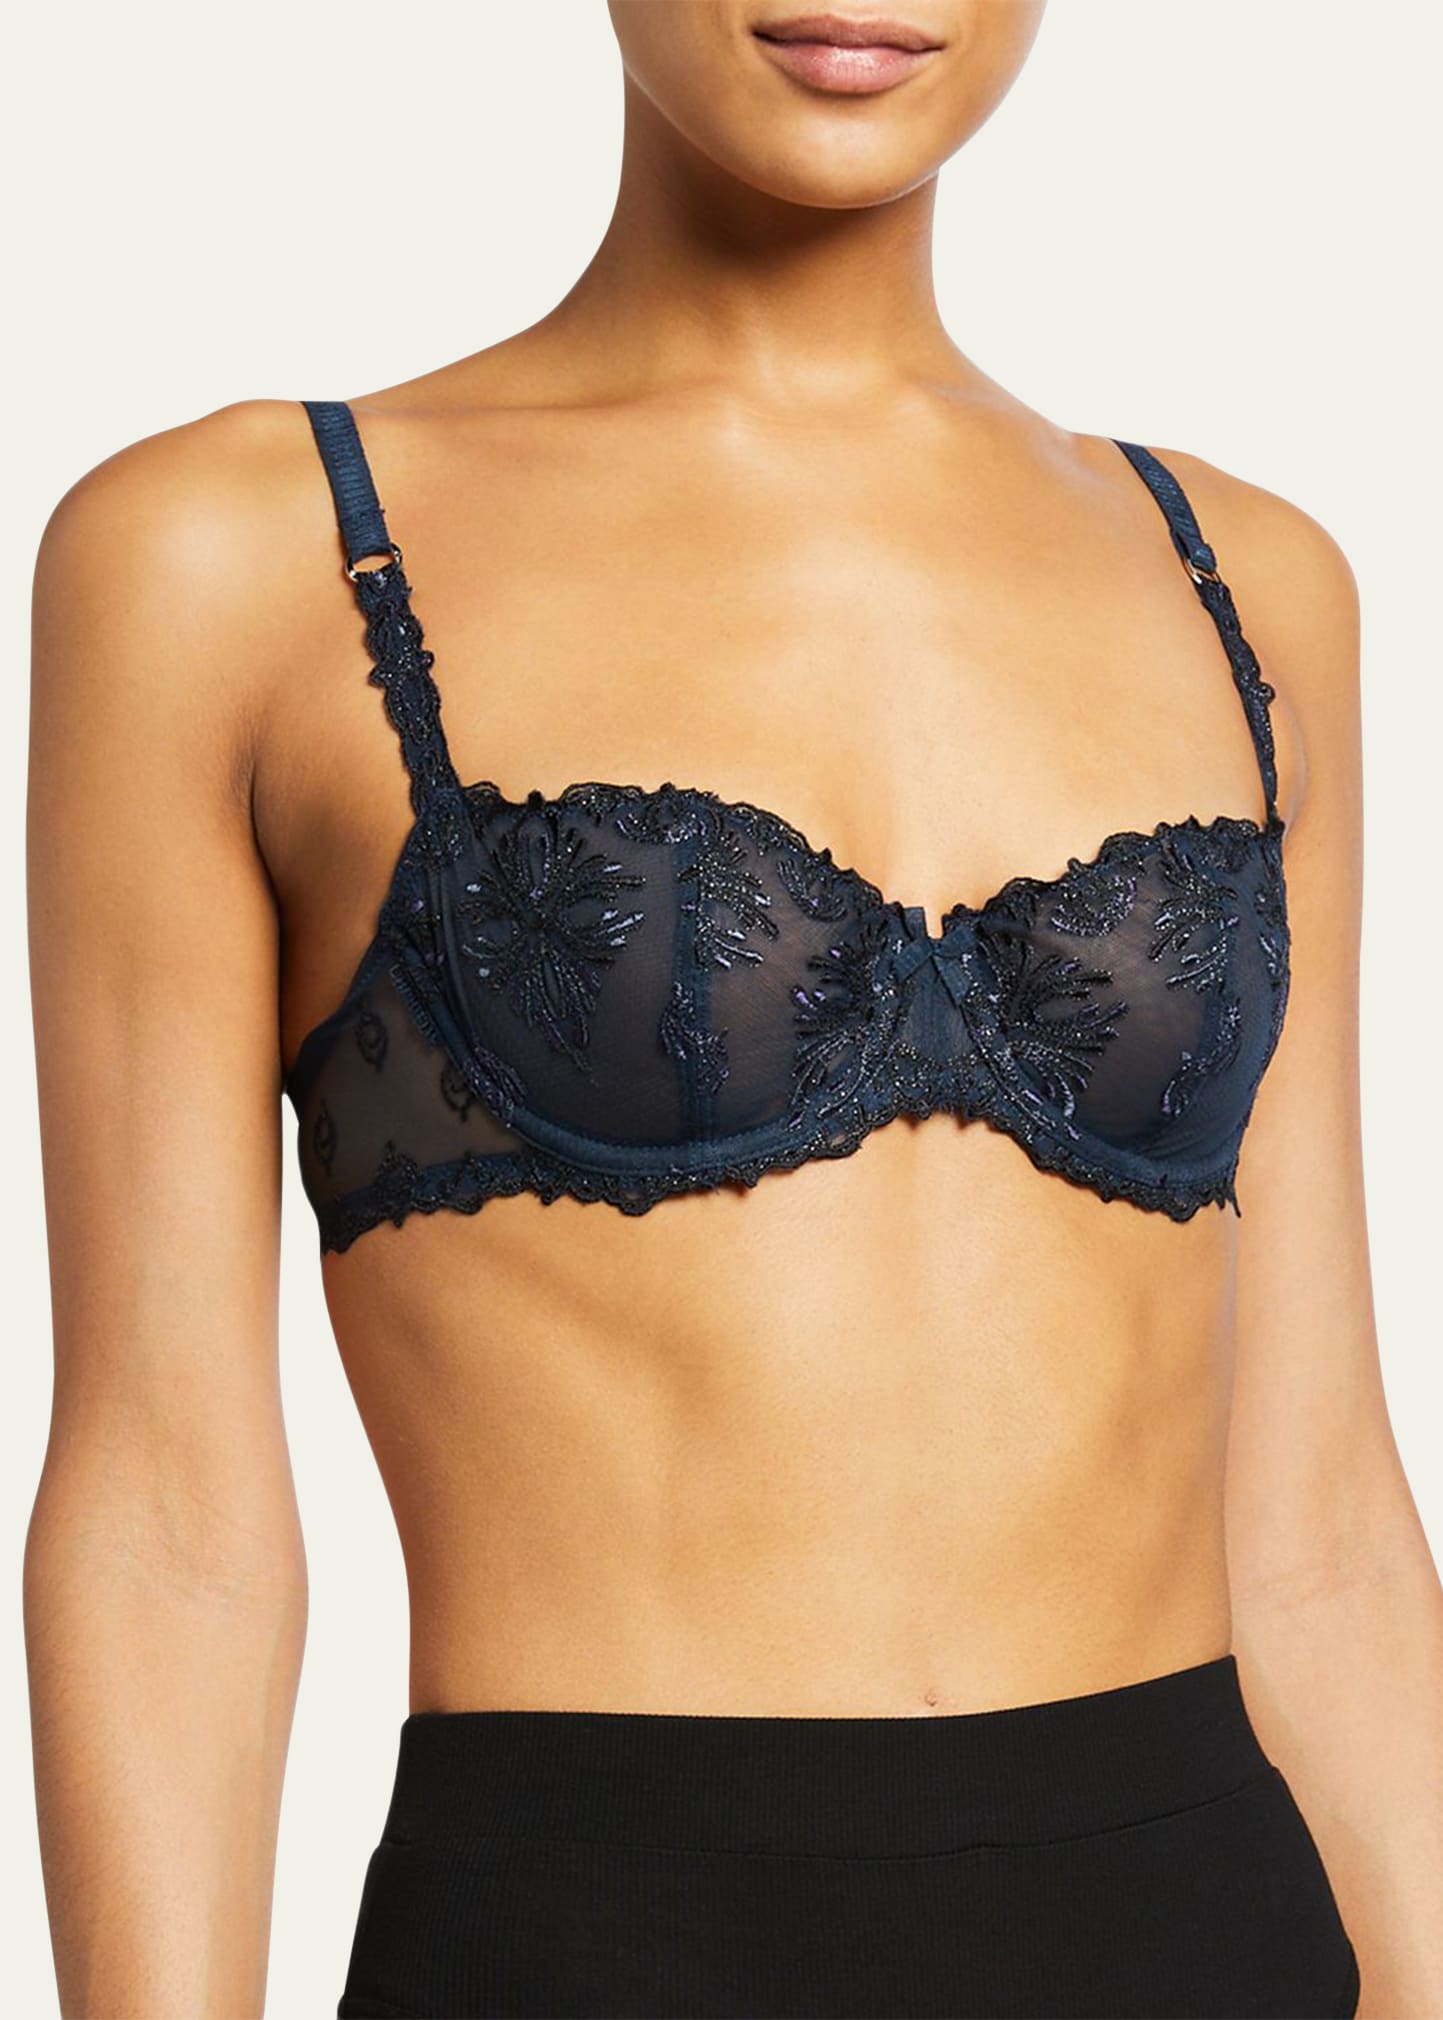 Chantelle Champs Elysees Thong – Top Drawer Lingerie